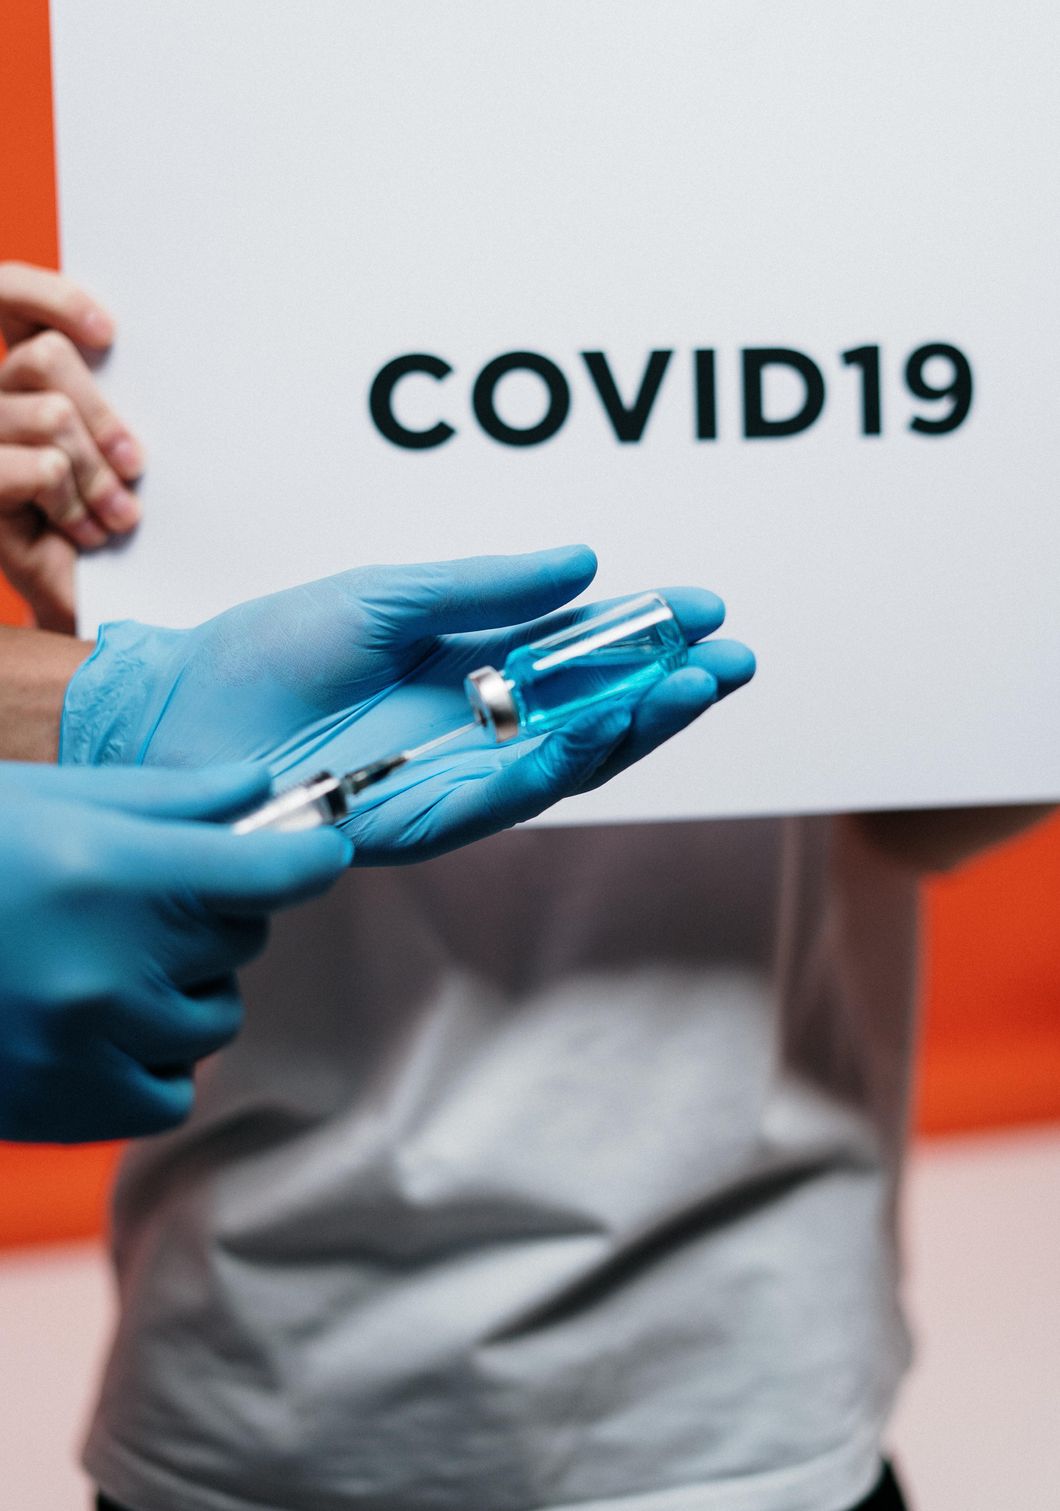 When Considering Whether Or Not To Get The COVID-19 Vaccine, Here Is What You Should Take Into Account